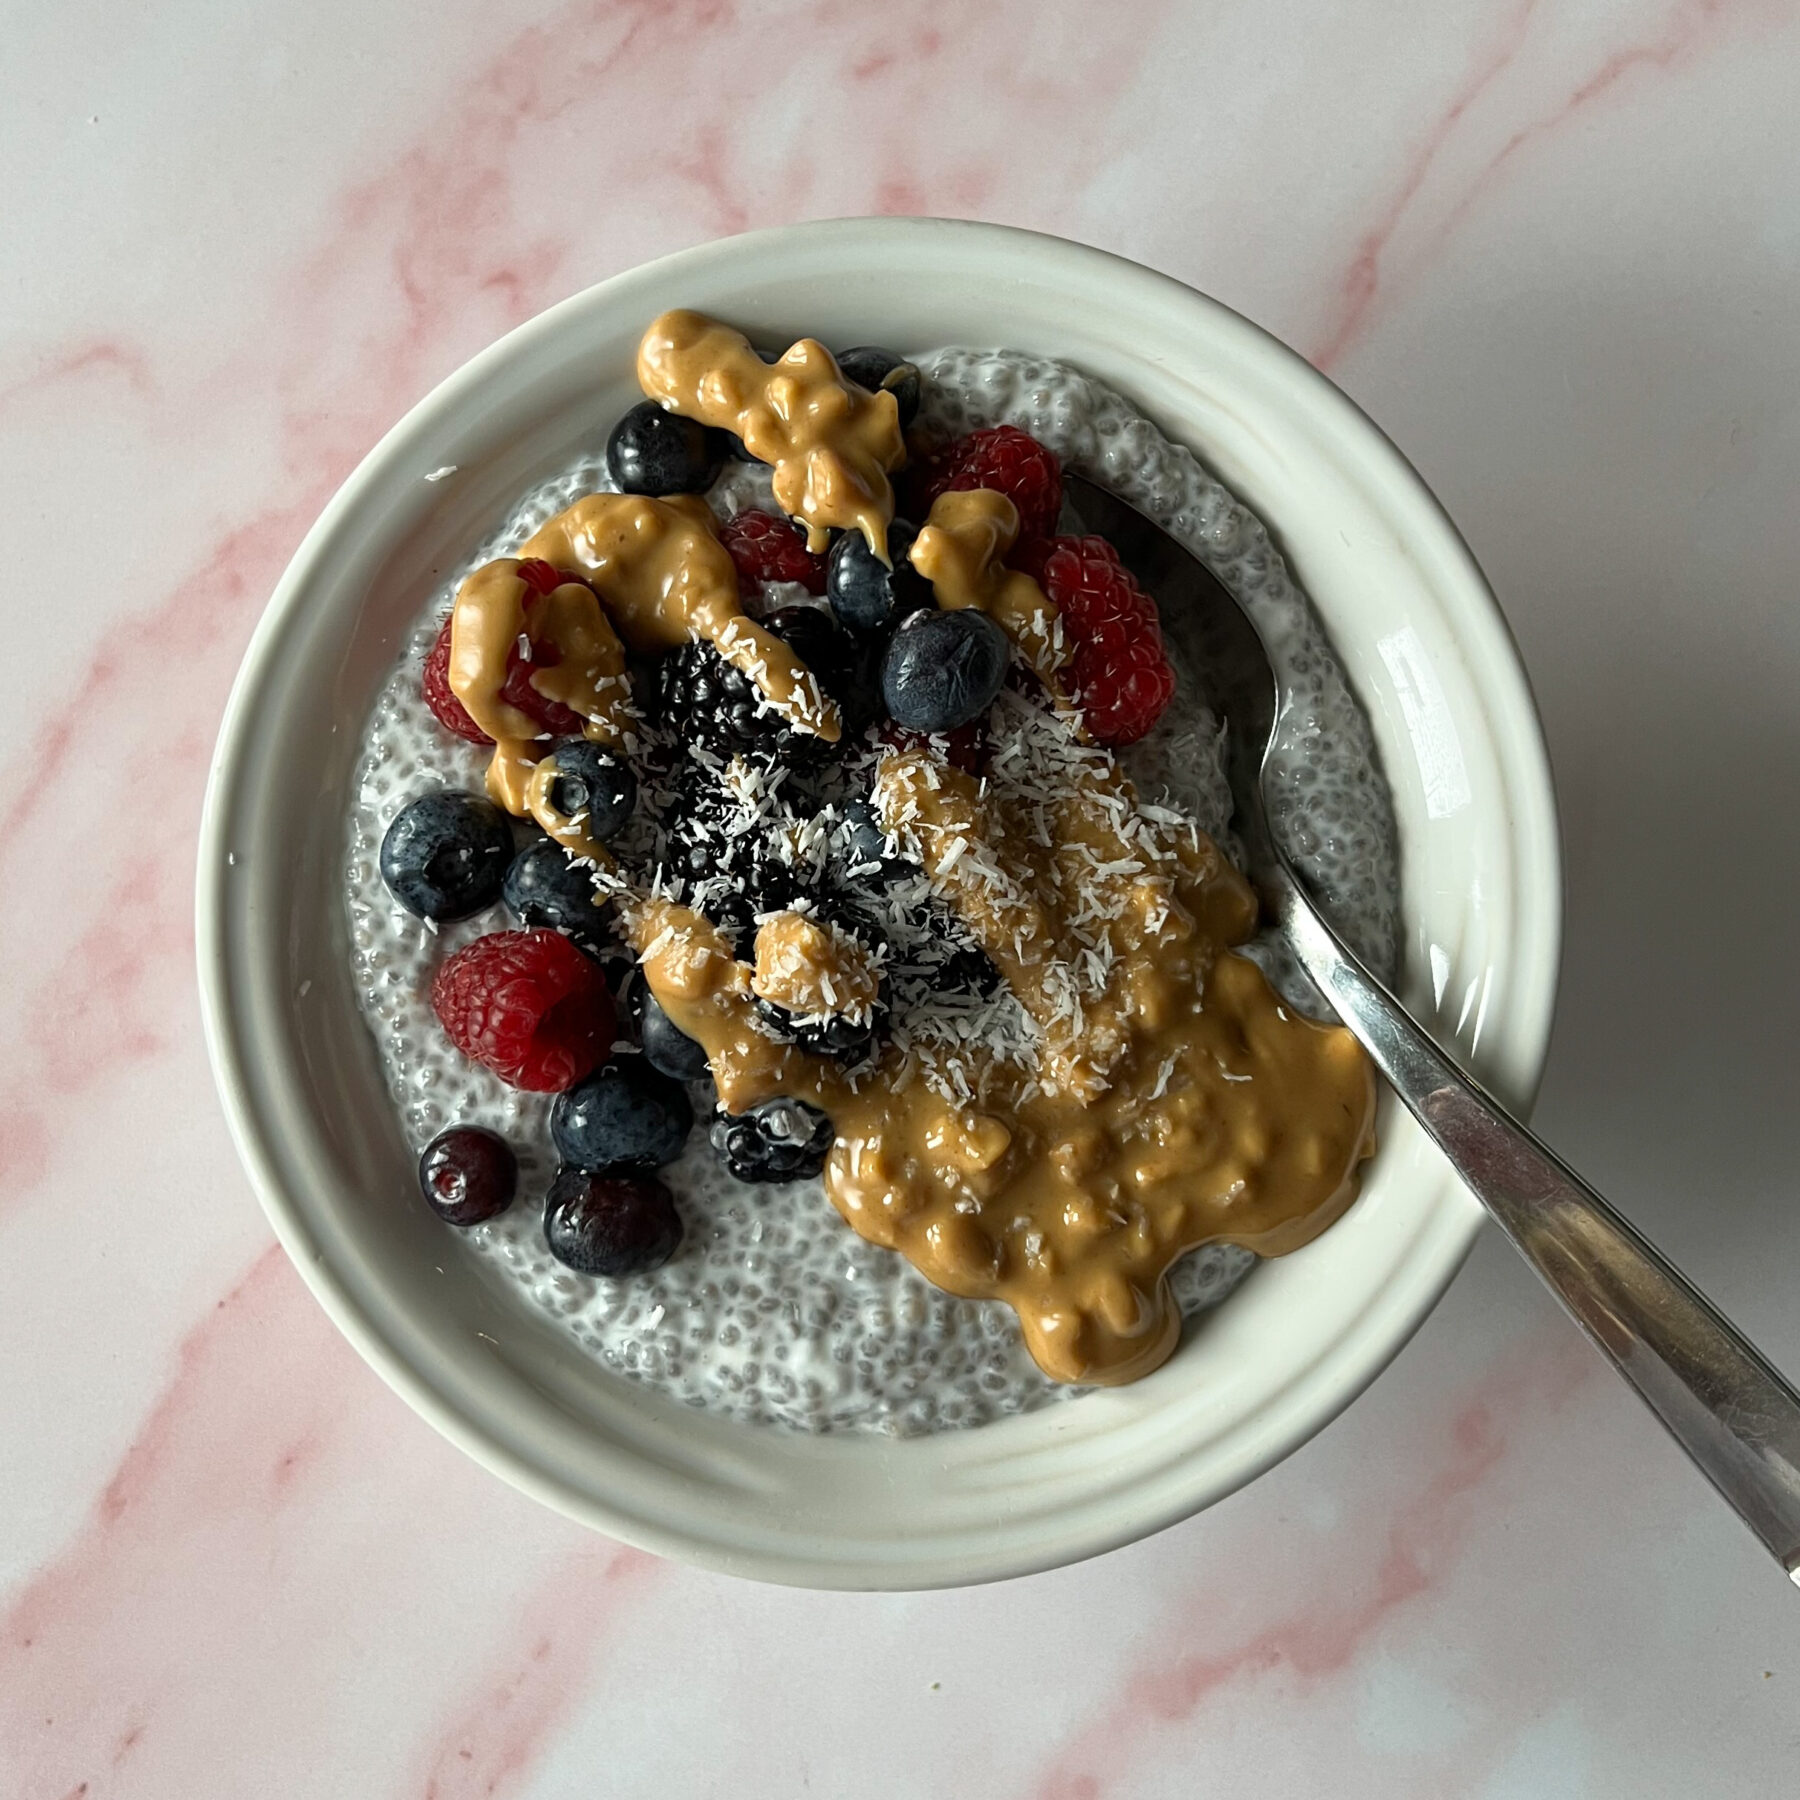 How to Make Chia Pudding with Protein